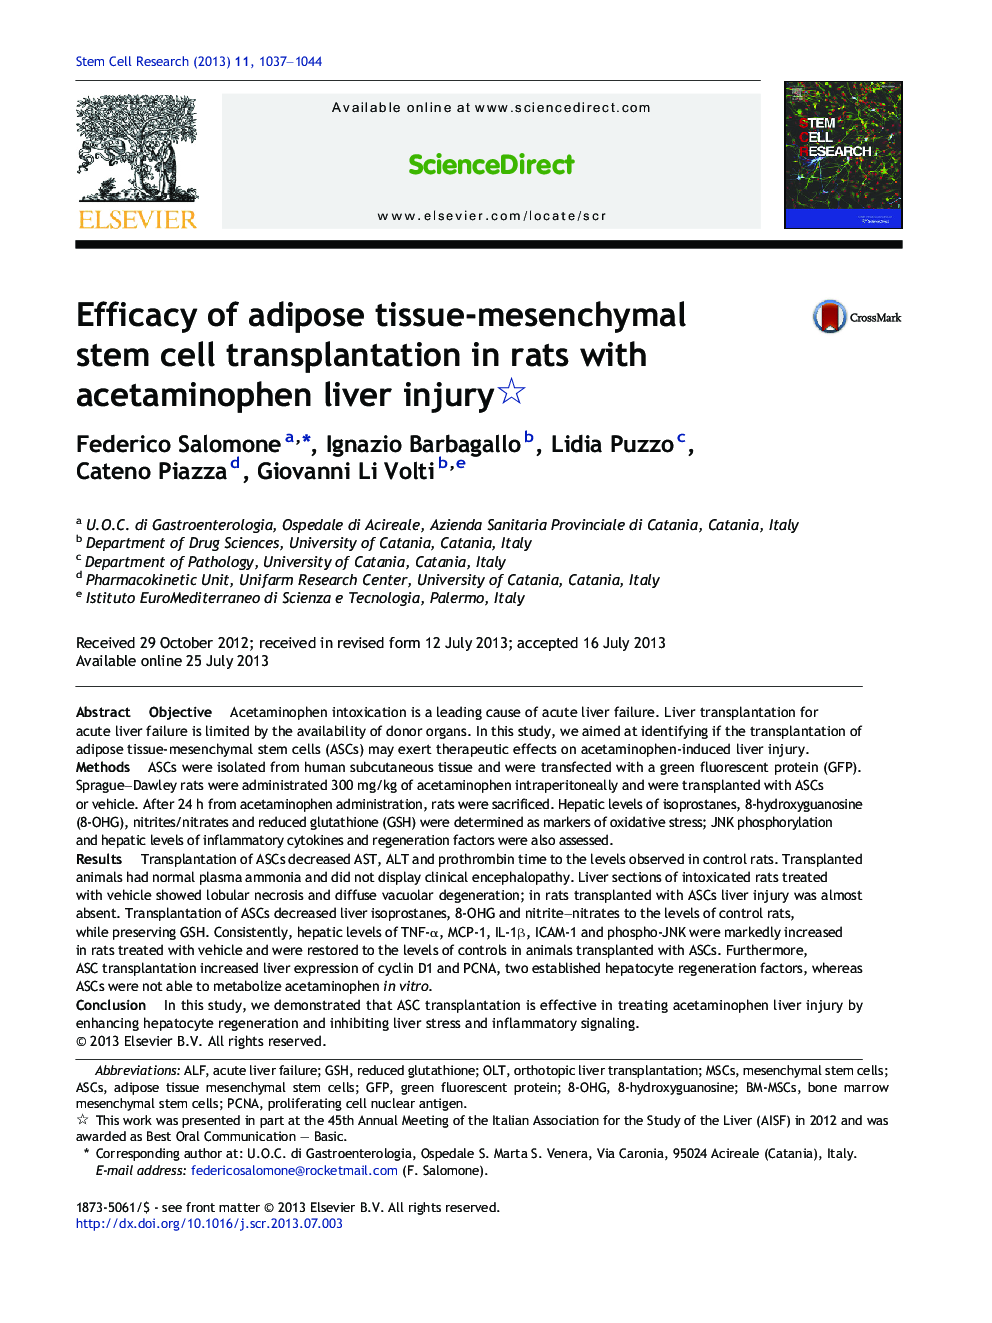 Efficacy of adipose tissue-mesenchymal stem cell transplantation in rats with acetaminophen liver injury